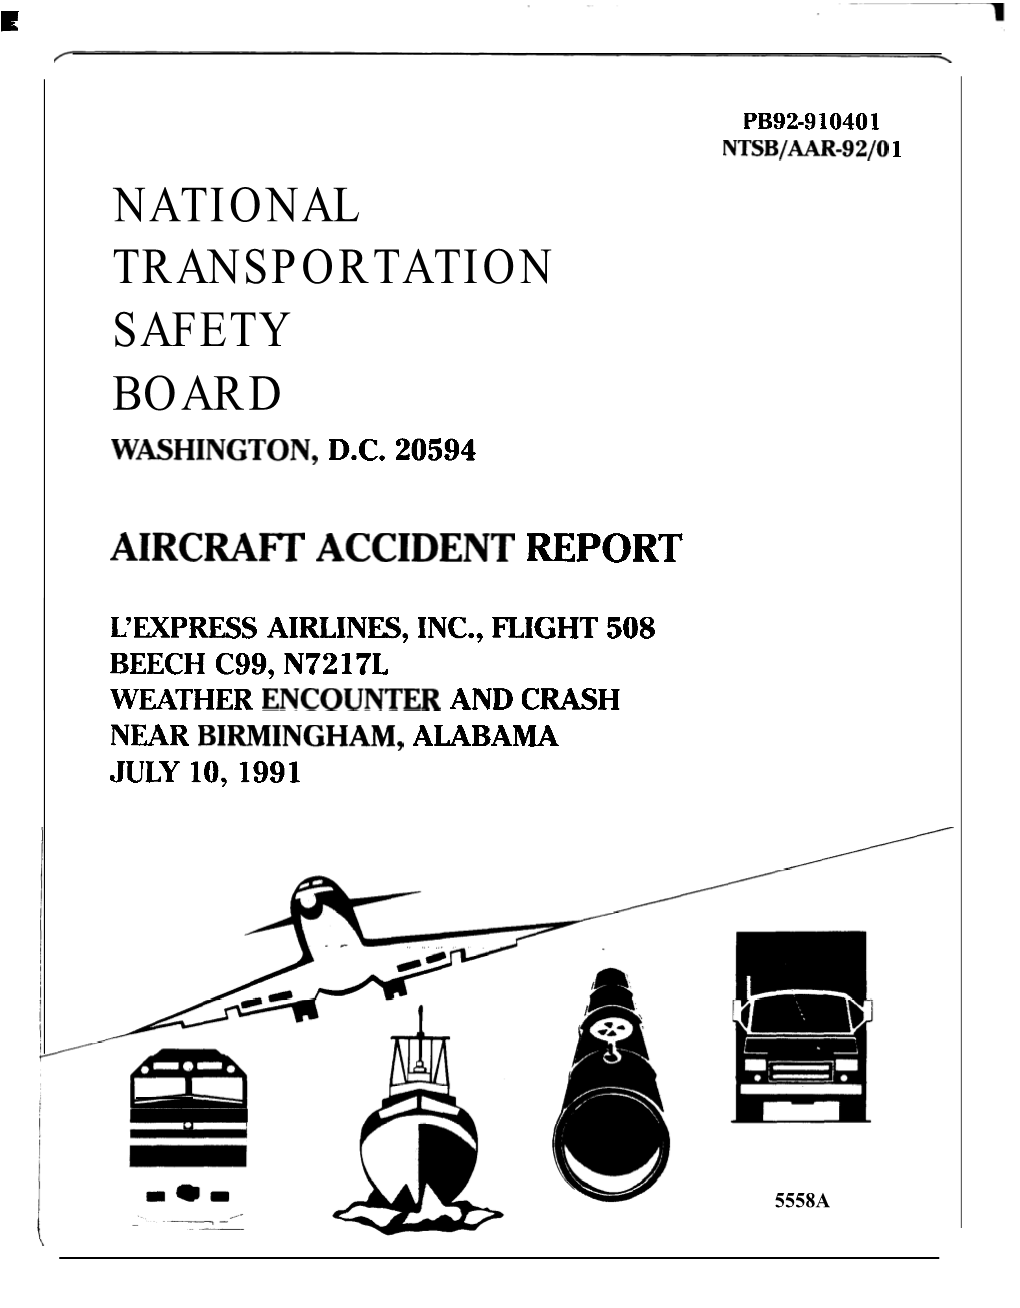 NTSB/AAR-92/01 NTSB Aircraft Accident Report, L'express Airlines